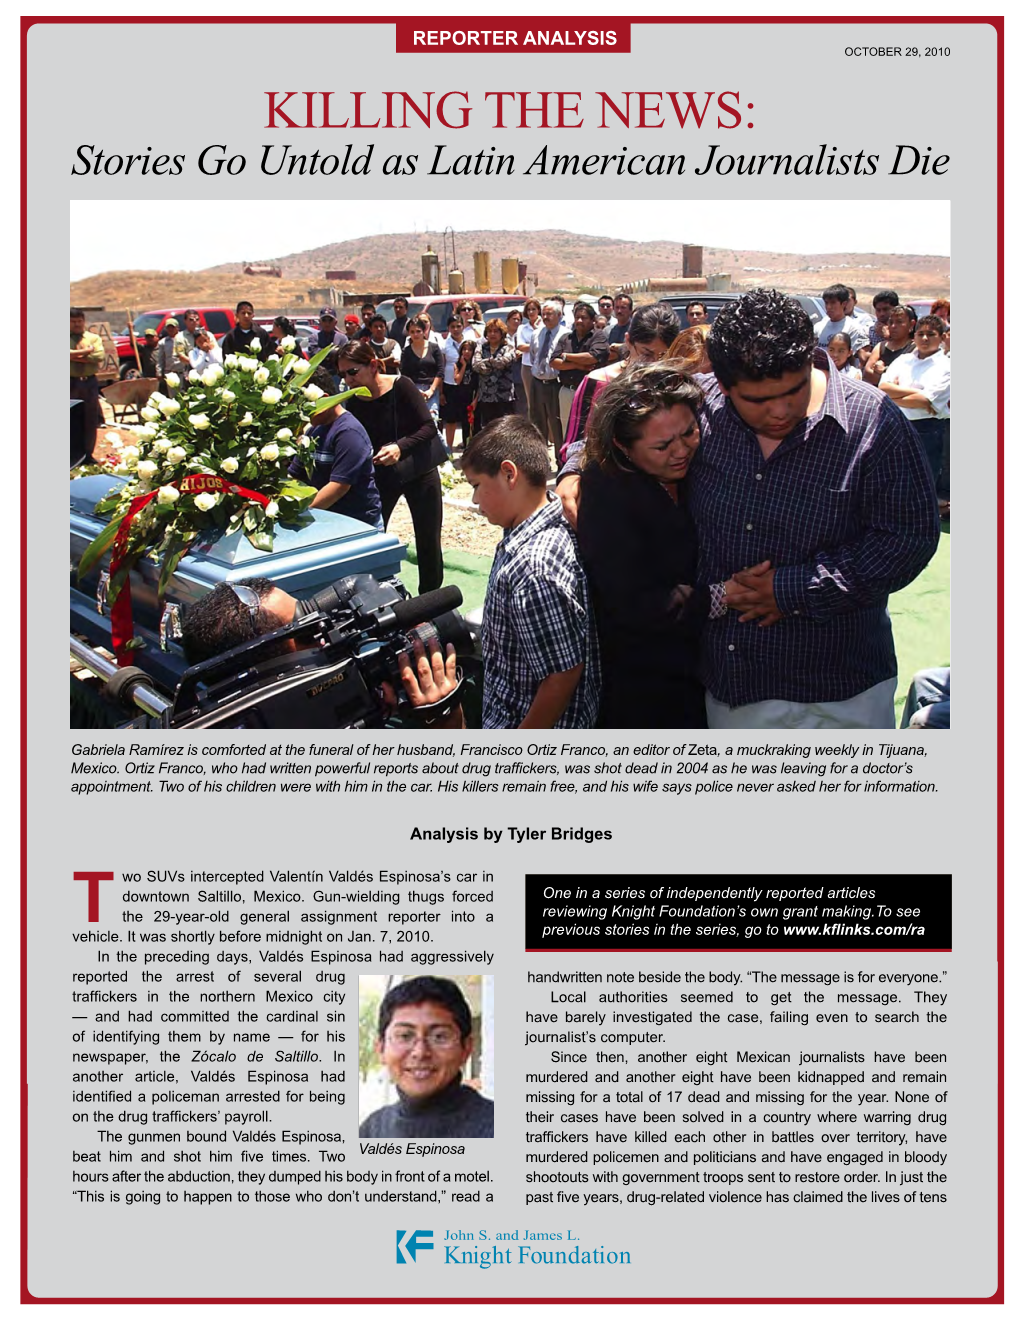 KILLING the NEWS: Stories Go Untold As Latin American Journalists Die